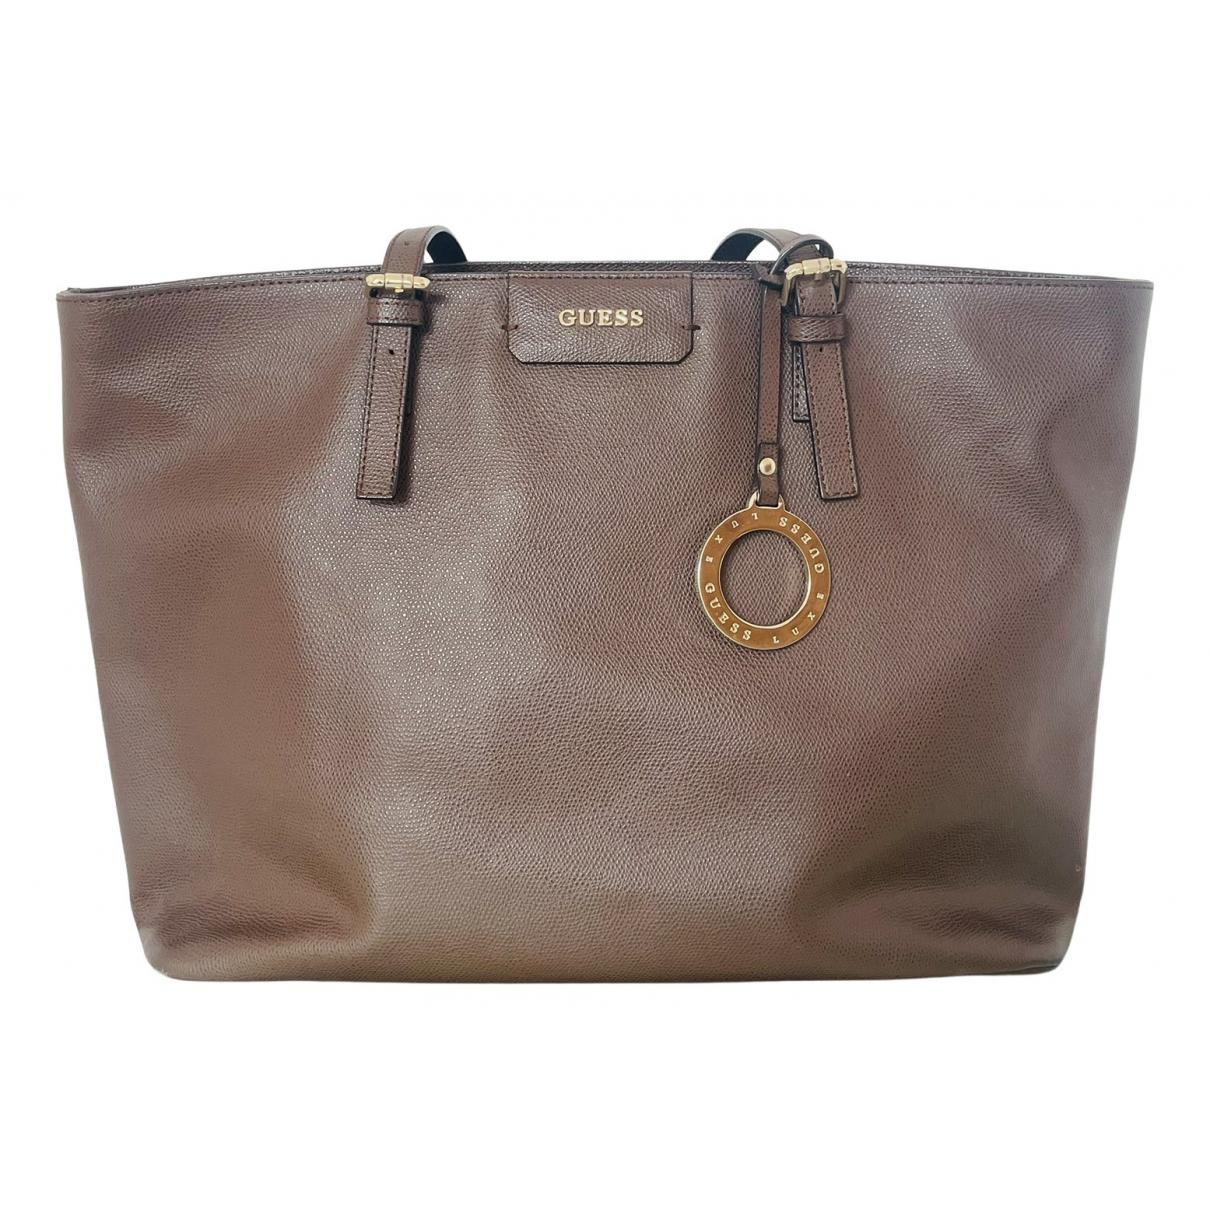 Vegan leather tote GUESS